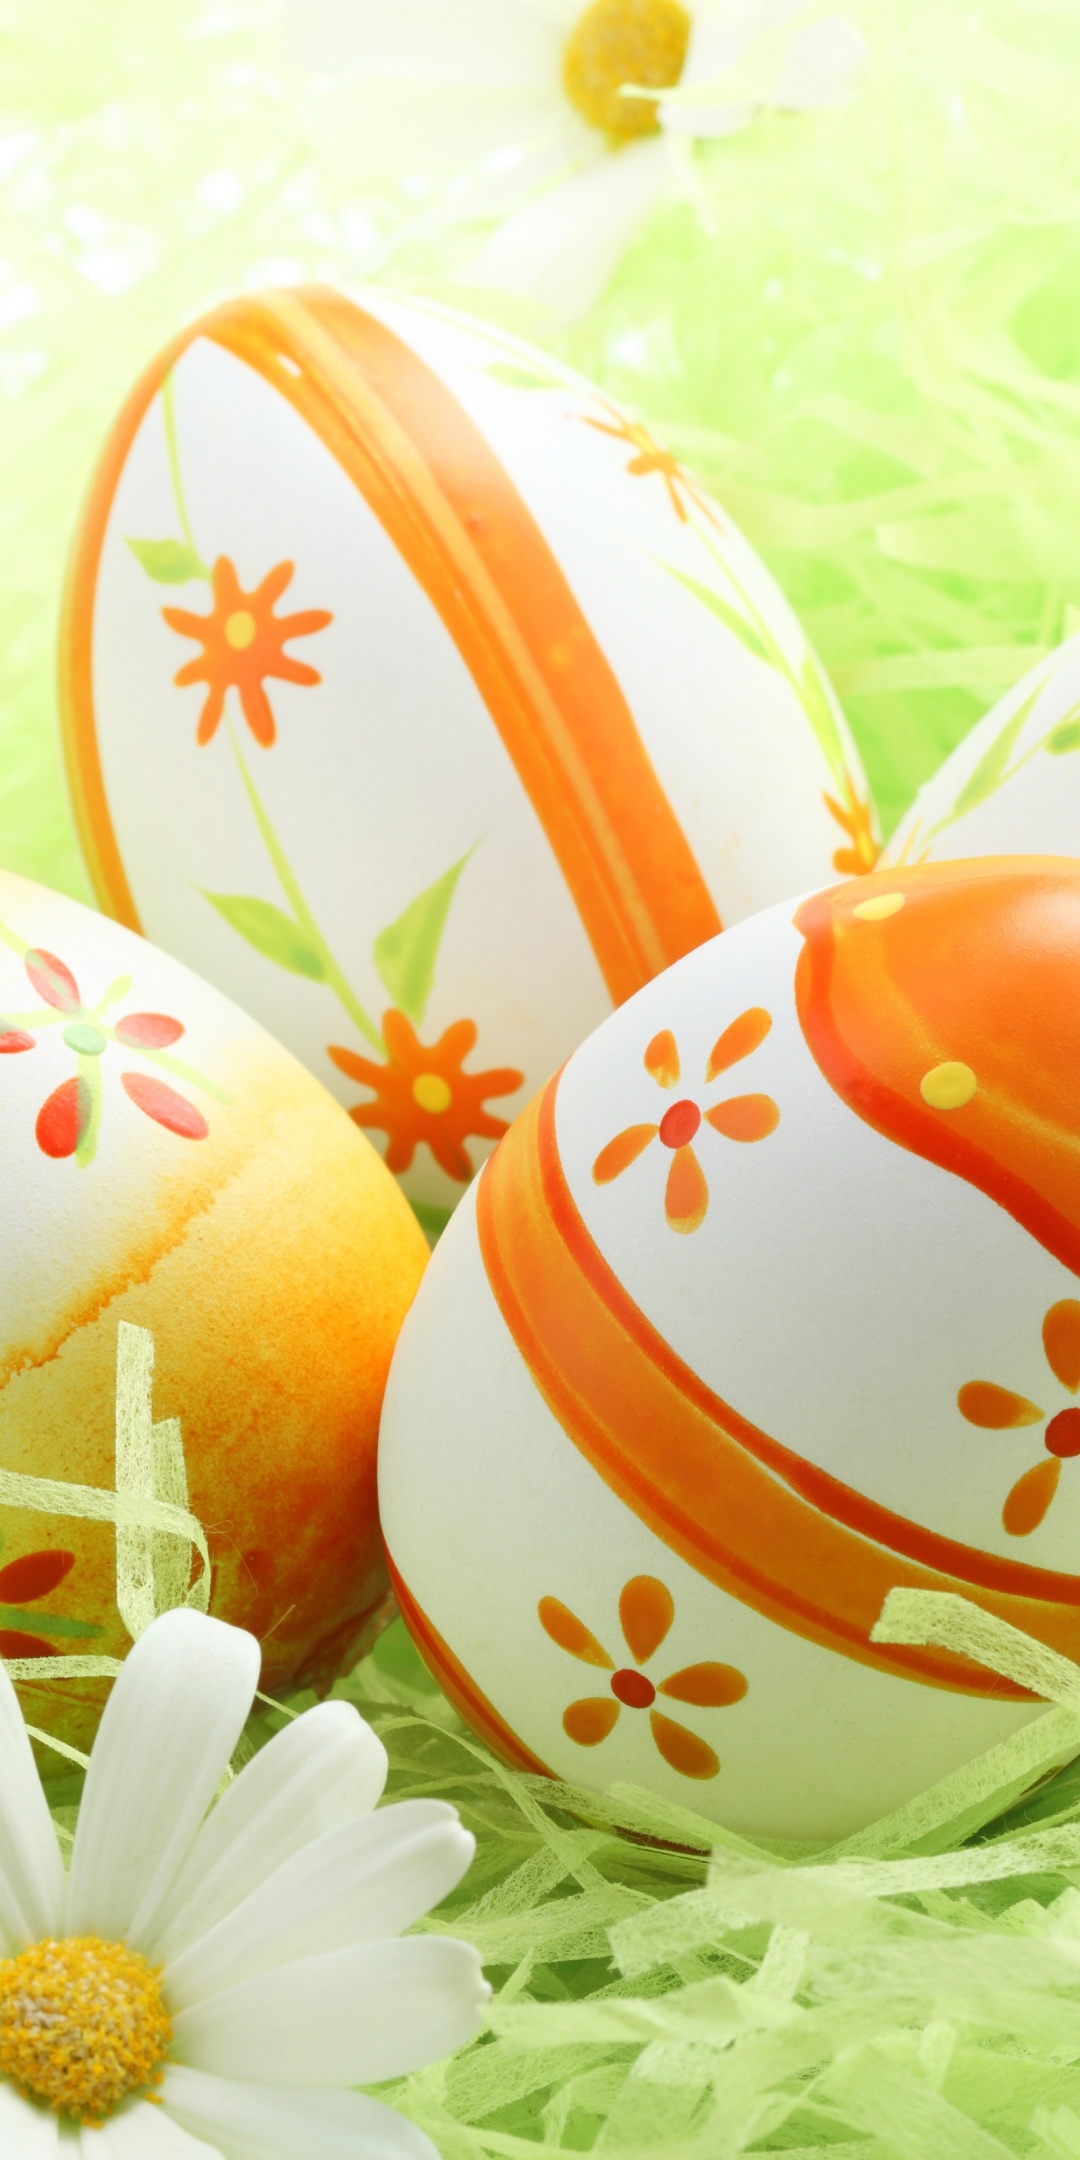 Easter Eggs Among The Daisies